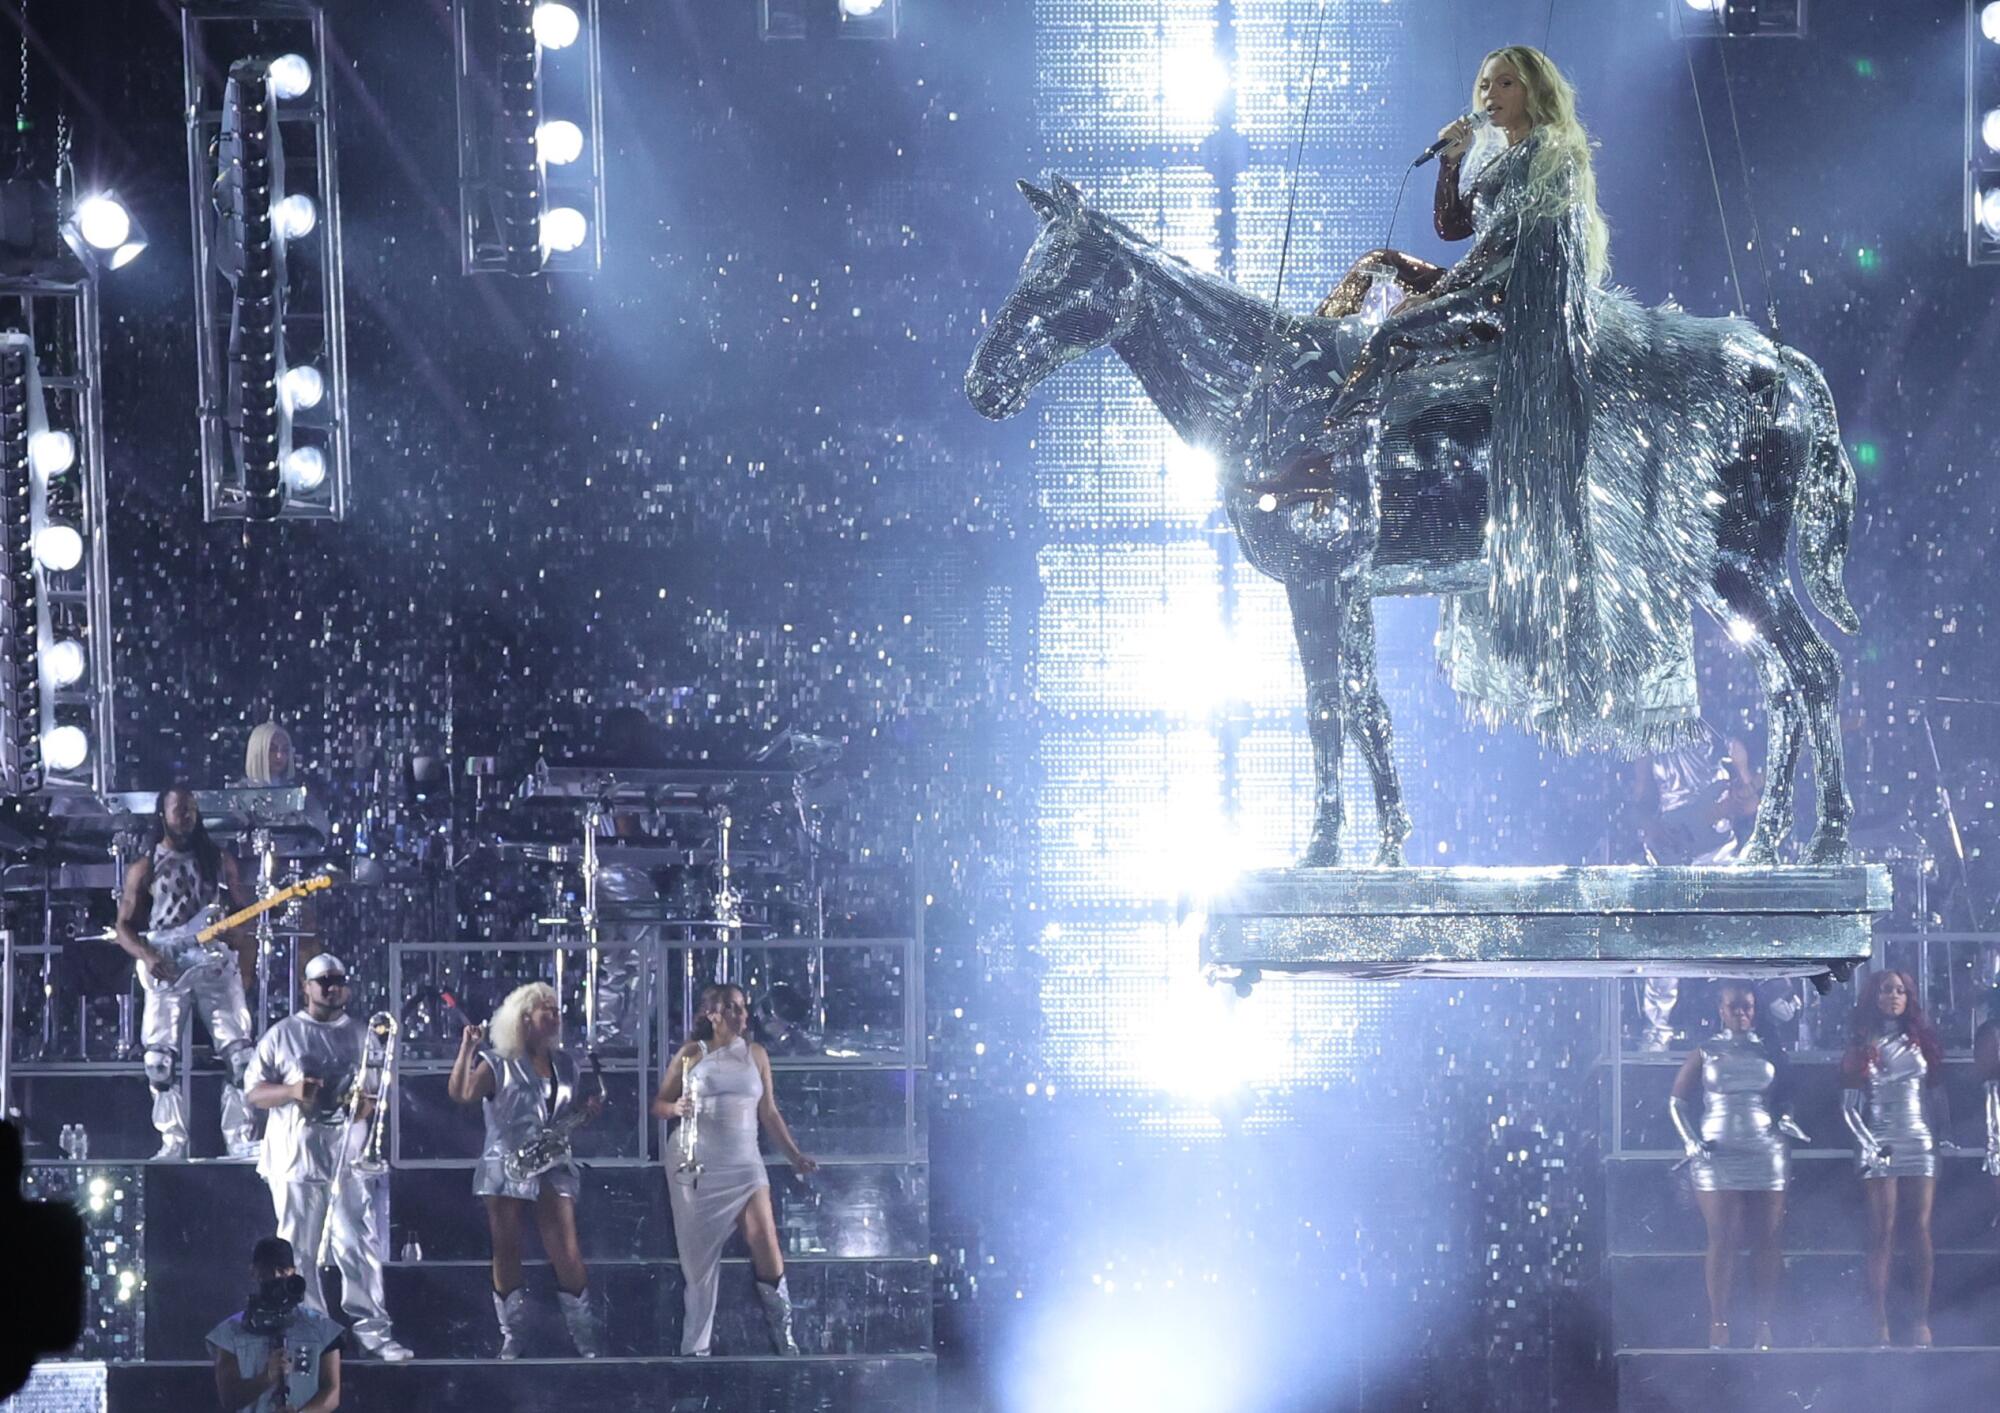 Beyoncé performs at MetLife Stadium in New Jersey on July 29. Crystal Torres is fourth from left.